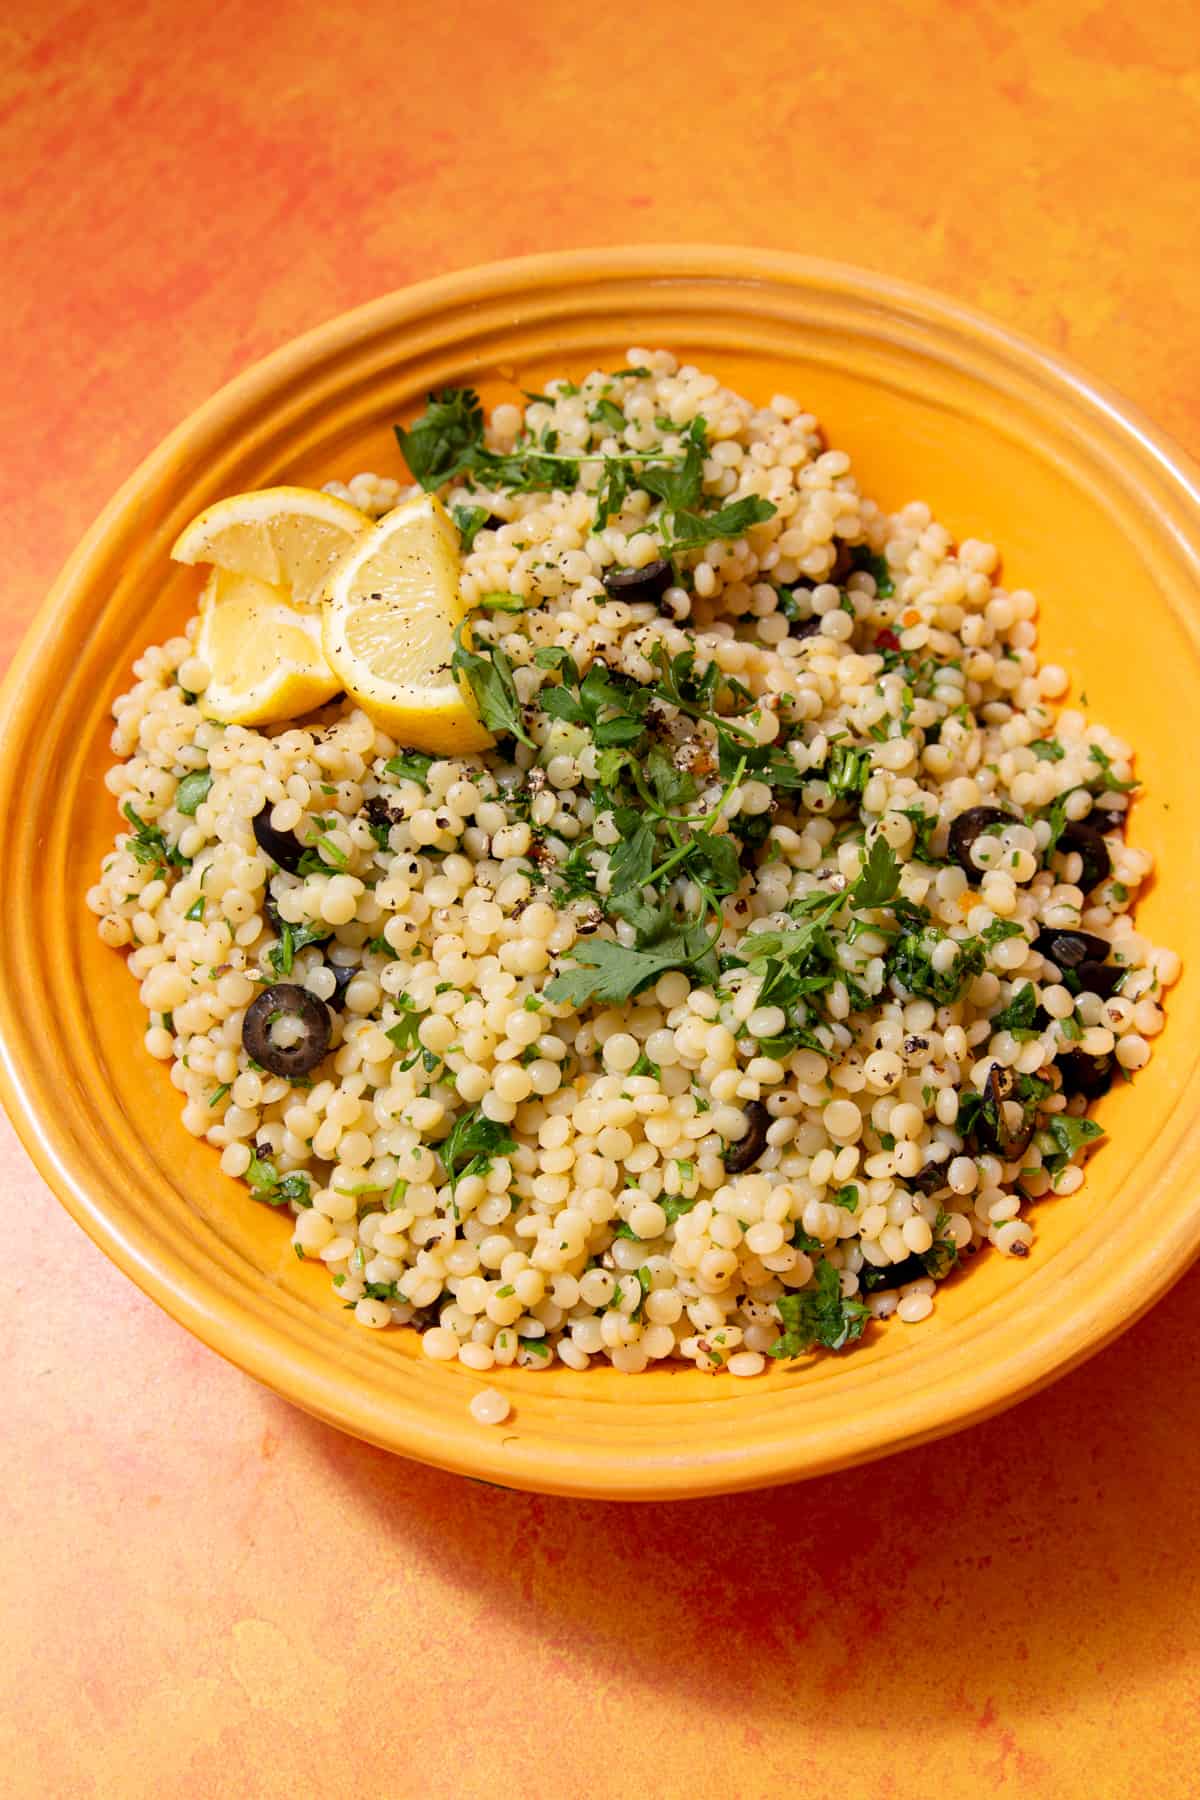 Overhead shot of a yellow dish with giant cous cous topped with herbs and lemon wedges and slices of black olives on an orange background.